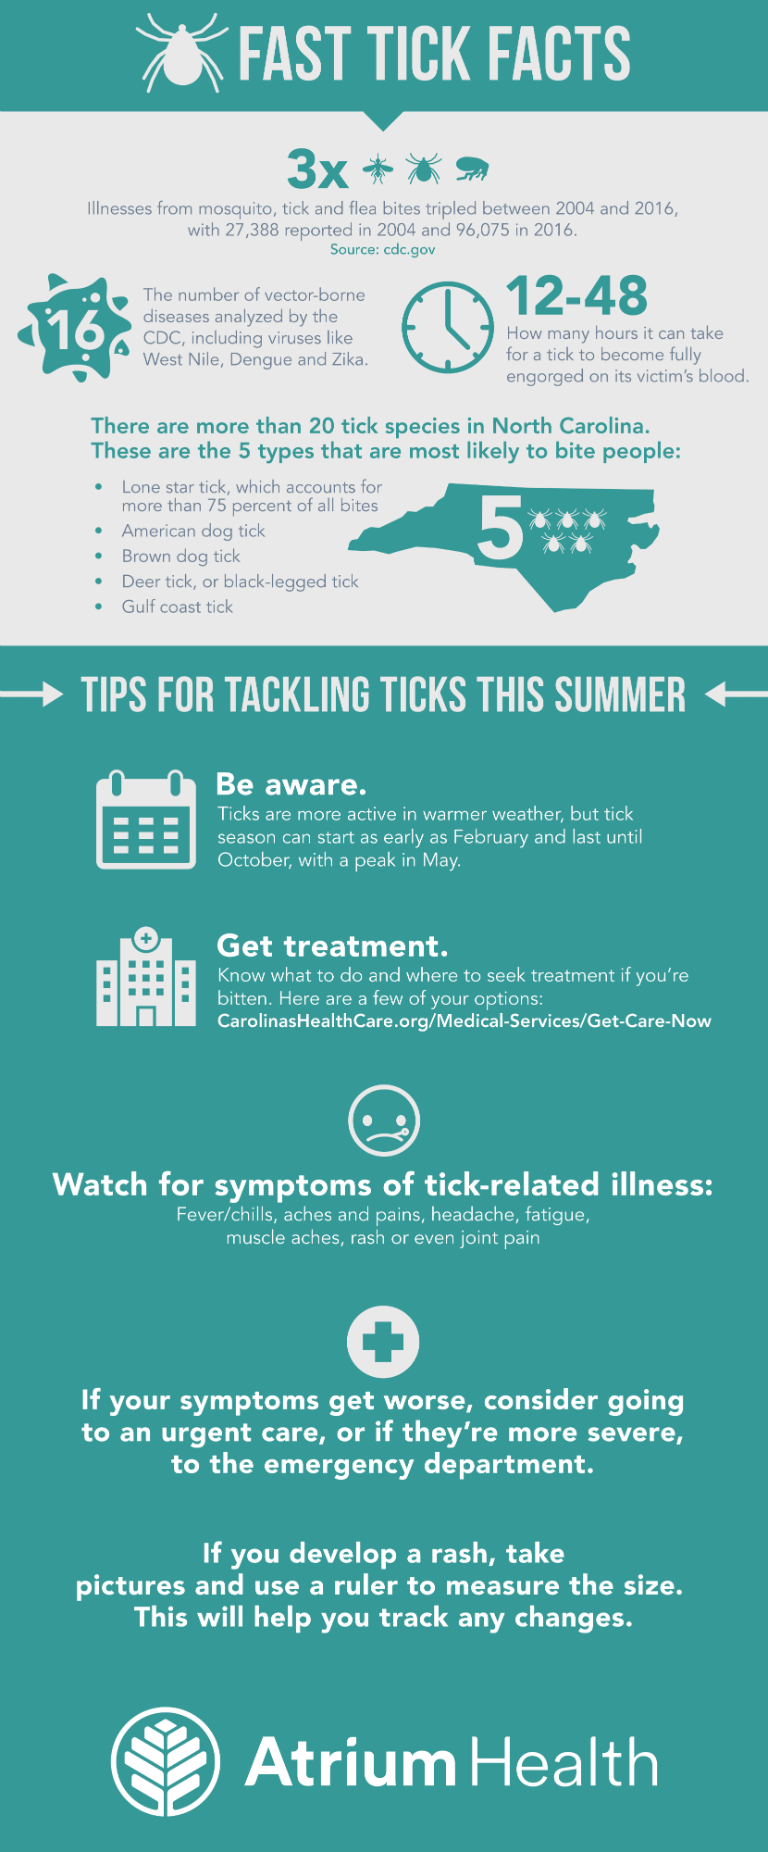 Tickborne illnesses are on the rise. Carmen Teague, MD, specialty medical director in internal medicine with Mecklenburg Medical Group - Uptown, discusses how to protect yourself and your family, while still enjoying your favorite outdoor activities.